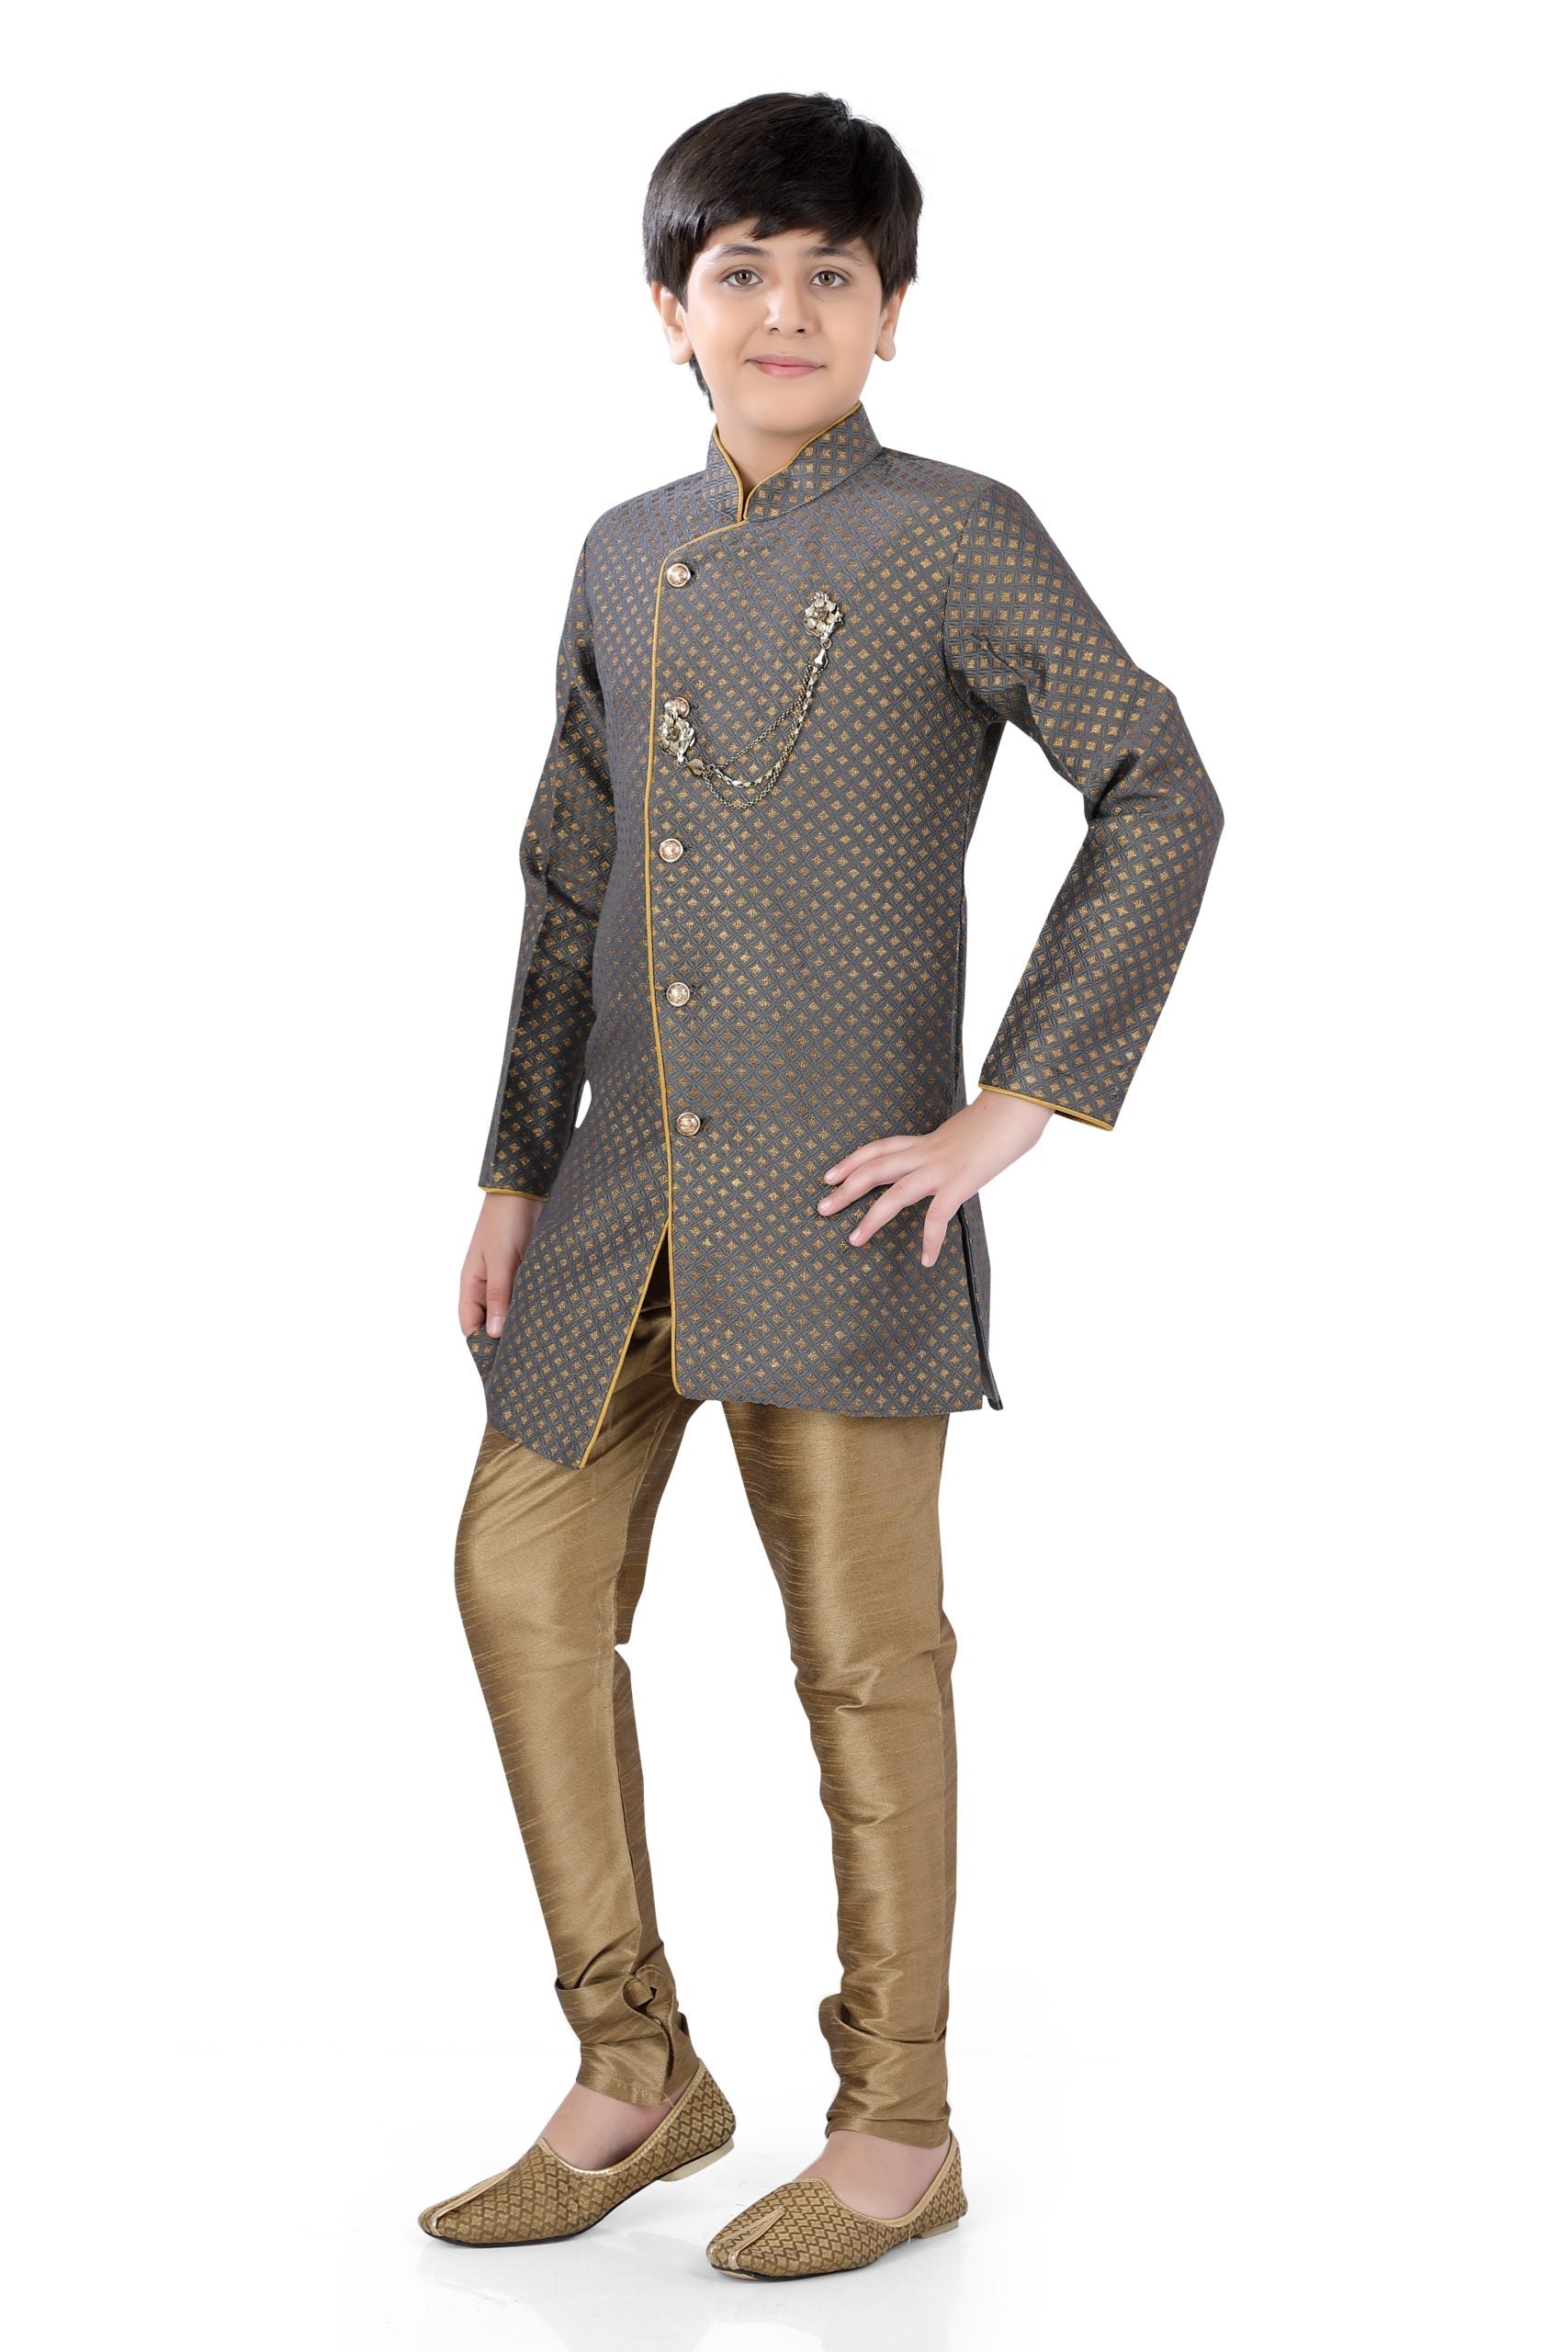 Boys Indo-western Dark Grey with Golden weaving - Premium Festive Wear from Dulhan Exclusives - Just $75! Shop now at Dulhan Exclusives